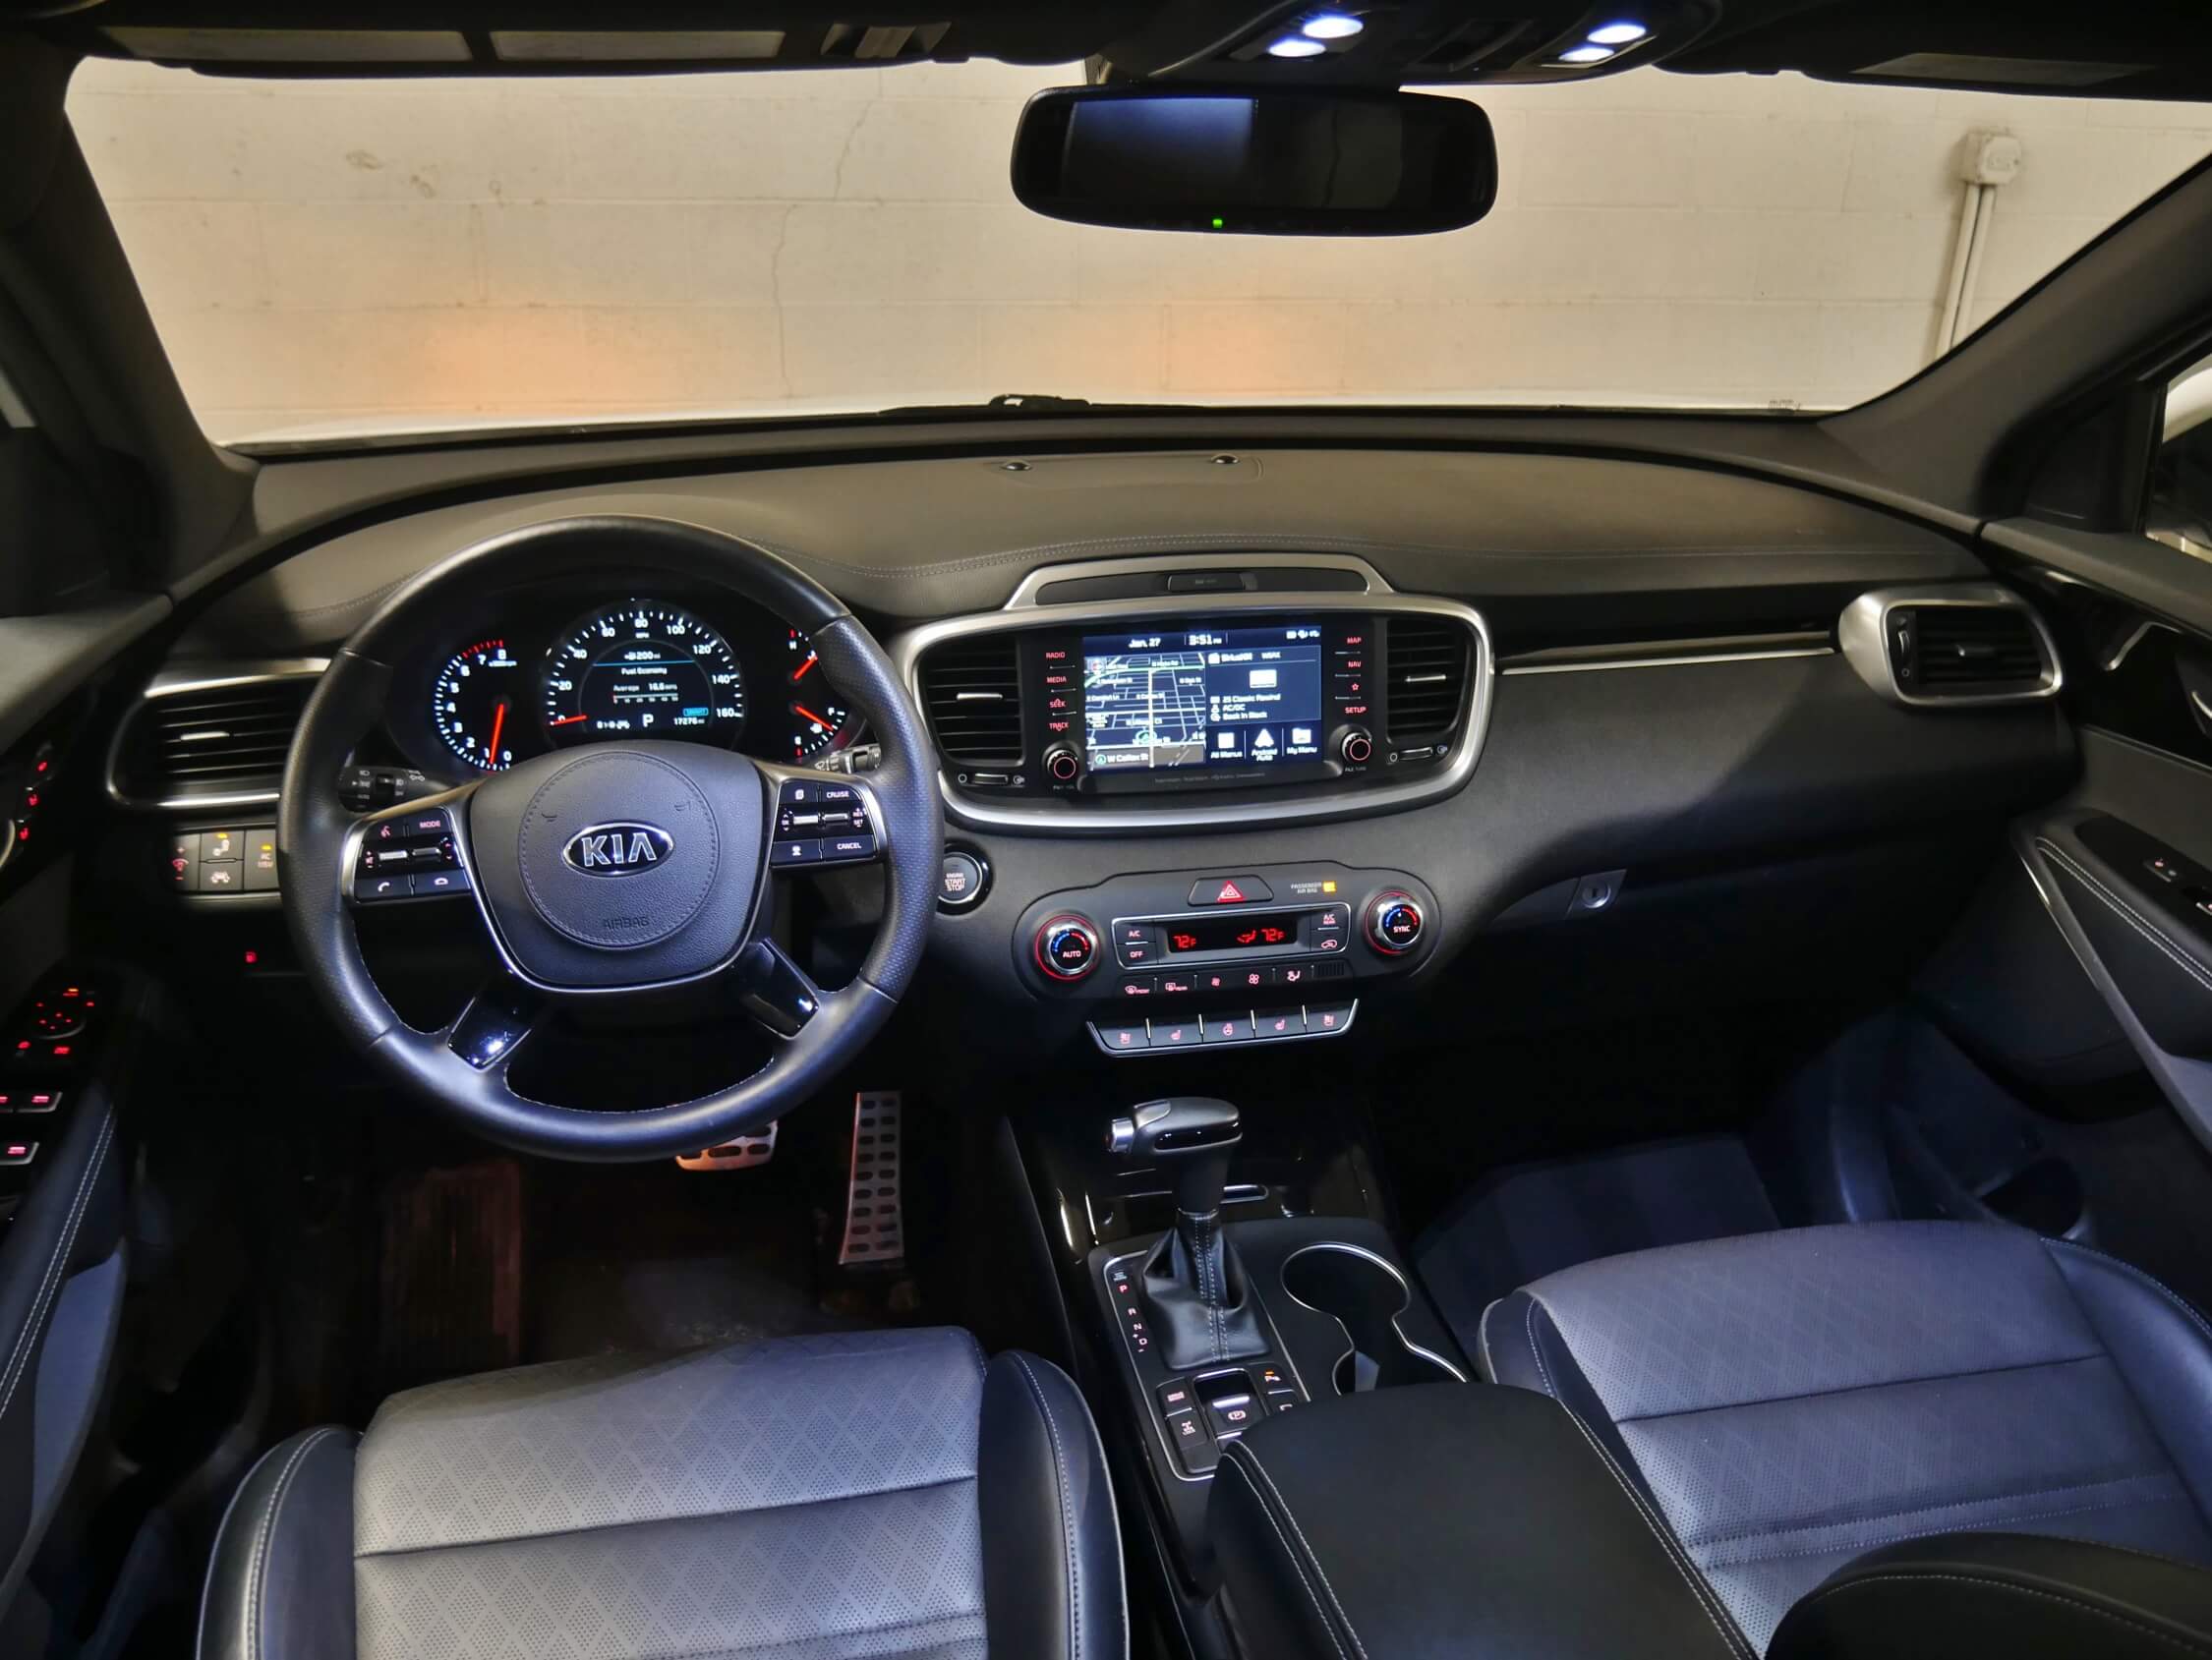 2019 Kia Sorento SXL AWD: Cohesively arranged cockpit w/ piano black matte metal accents, contrast stitched soft materials, ELD analog instruments and 8.0" upper center mid dash touch LCD infotainment navigation screen.